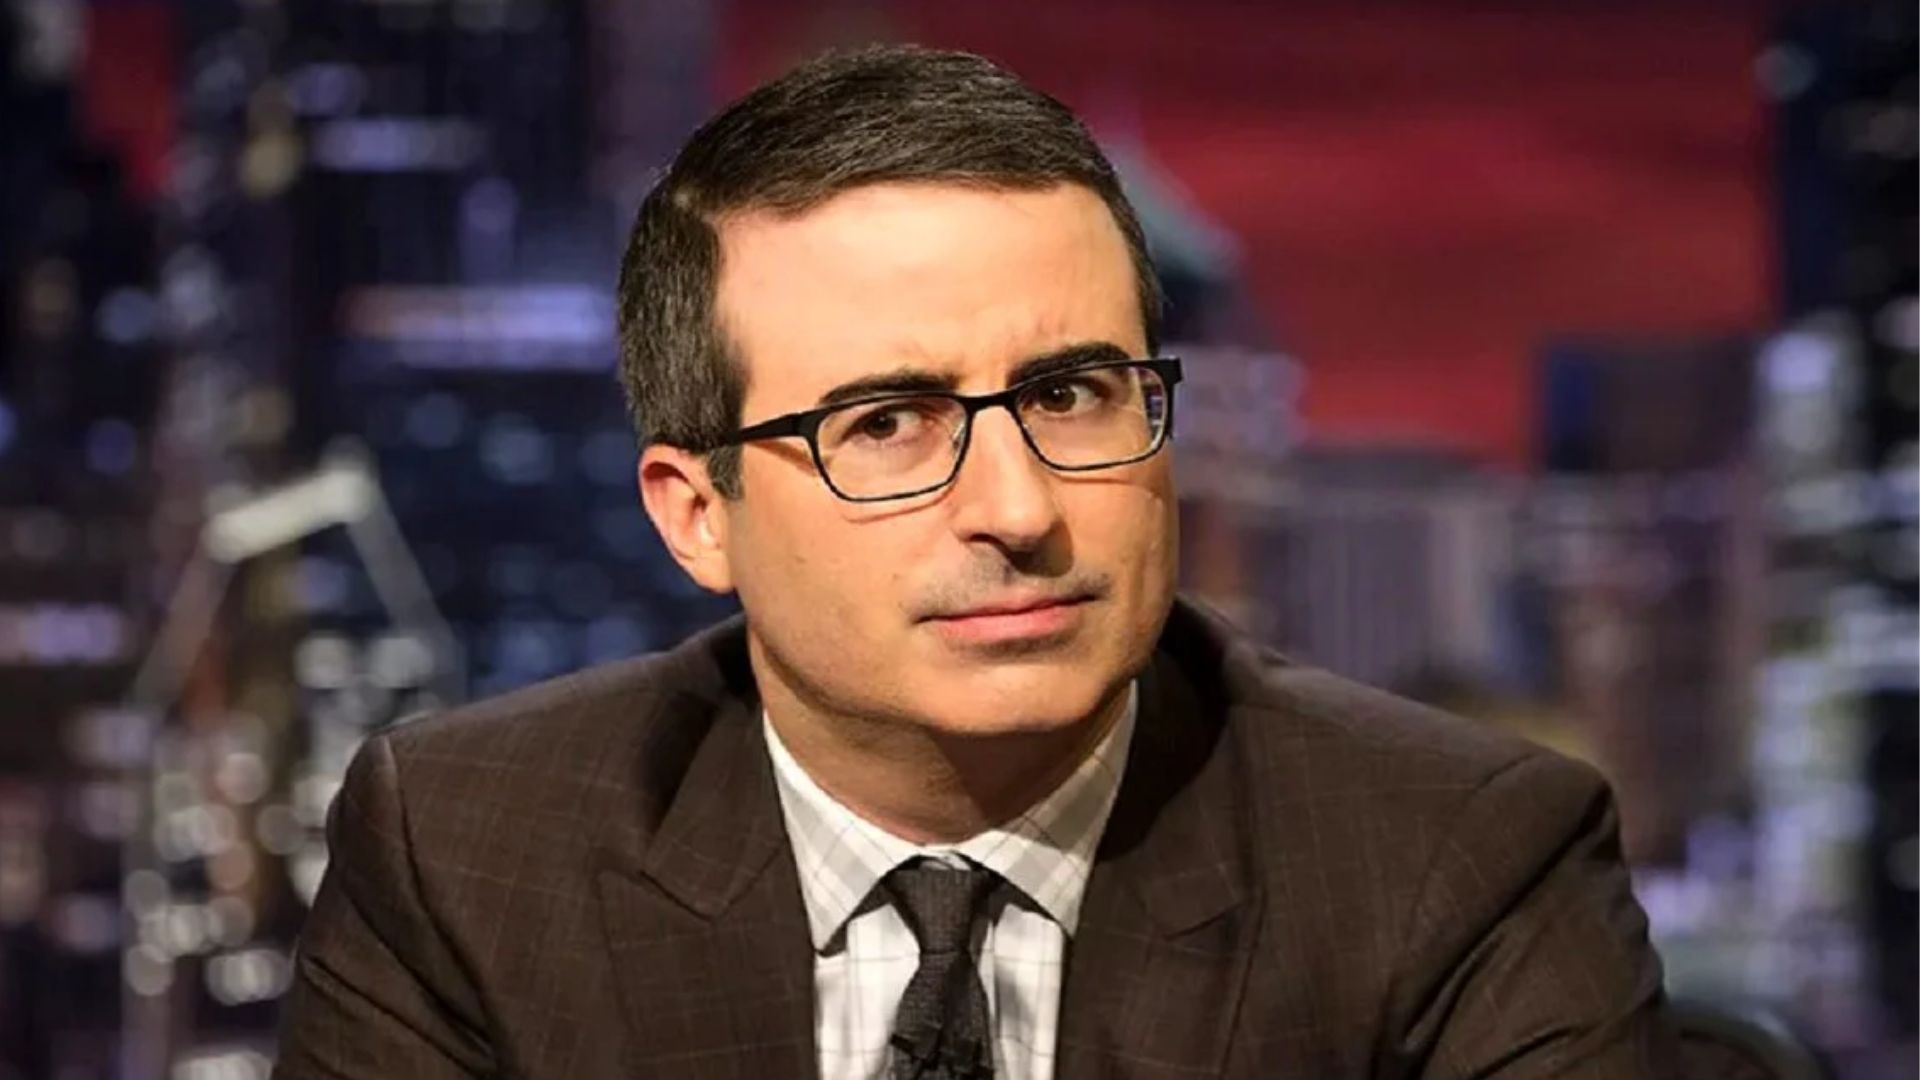 John Oliver Sitting In An Interview